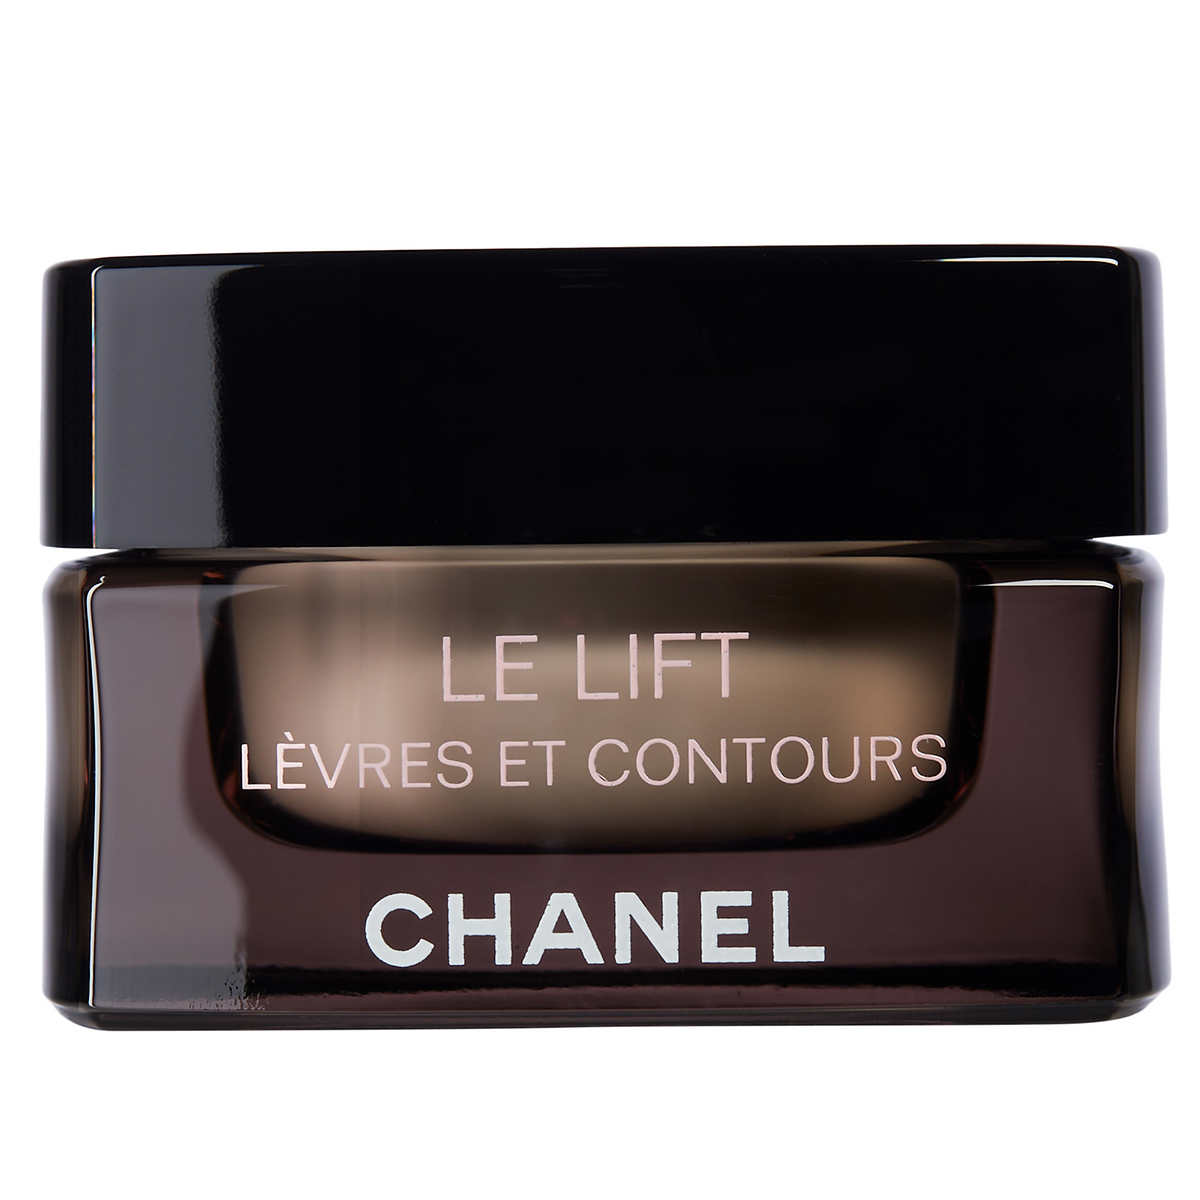 Chanel Have Ushered In Two New Products In Its Le Left Skincare Line